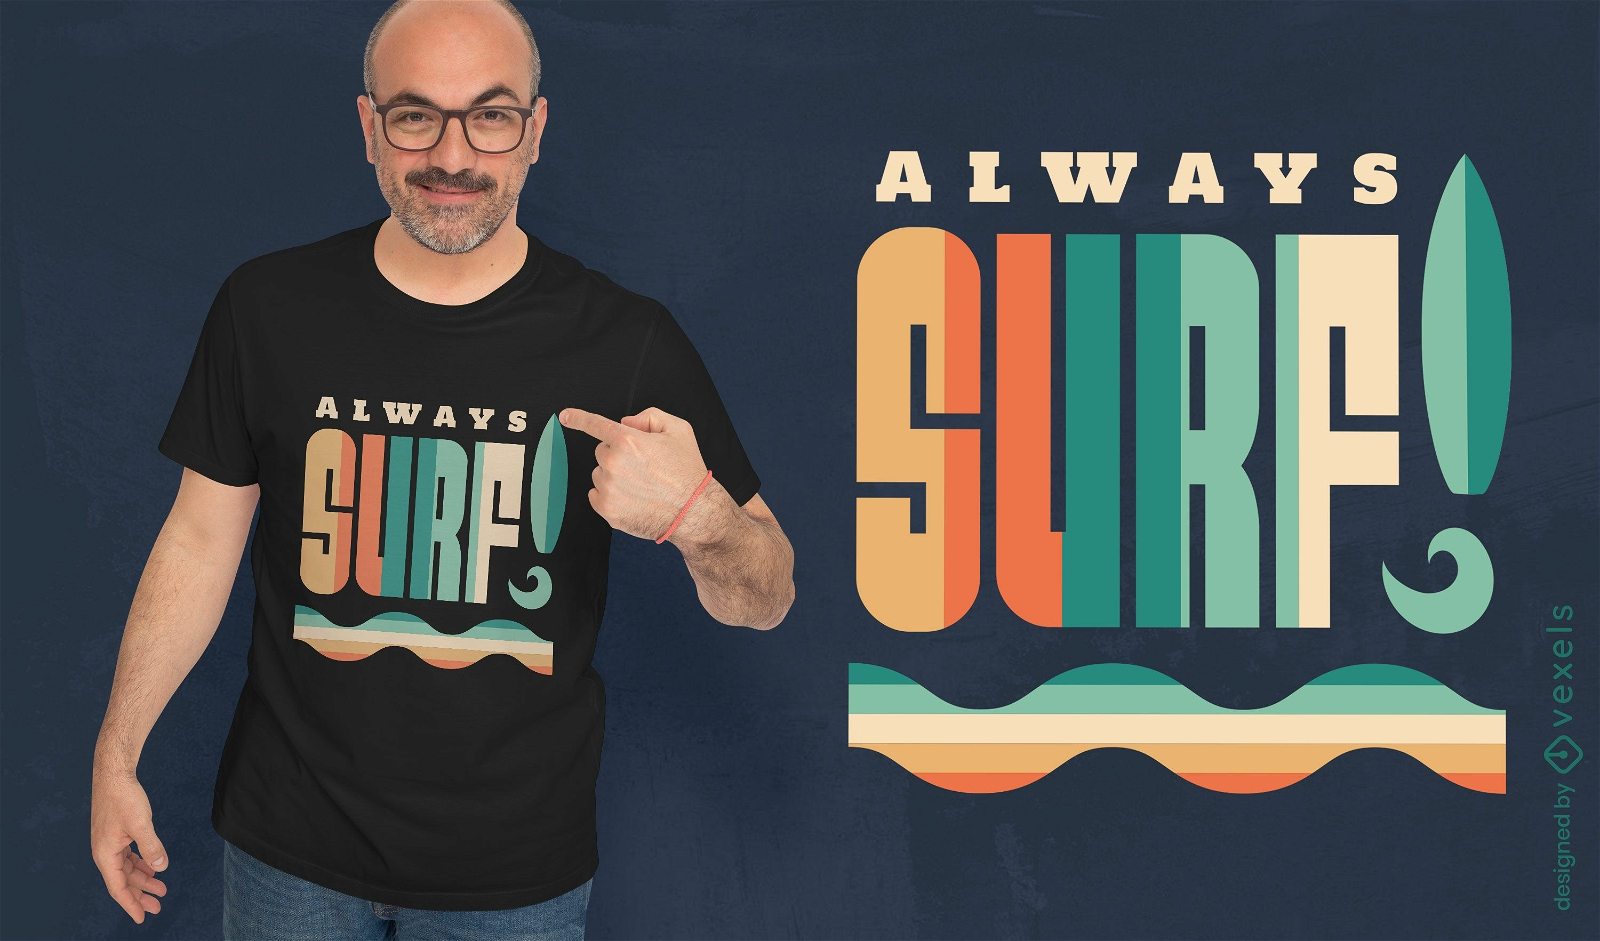 Surfing hobby quote t-shirt design